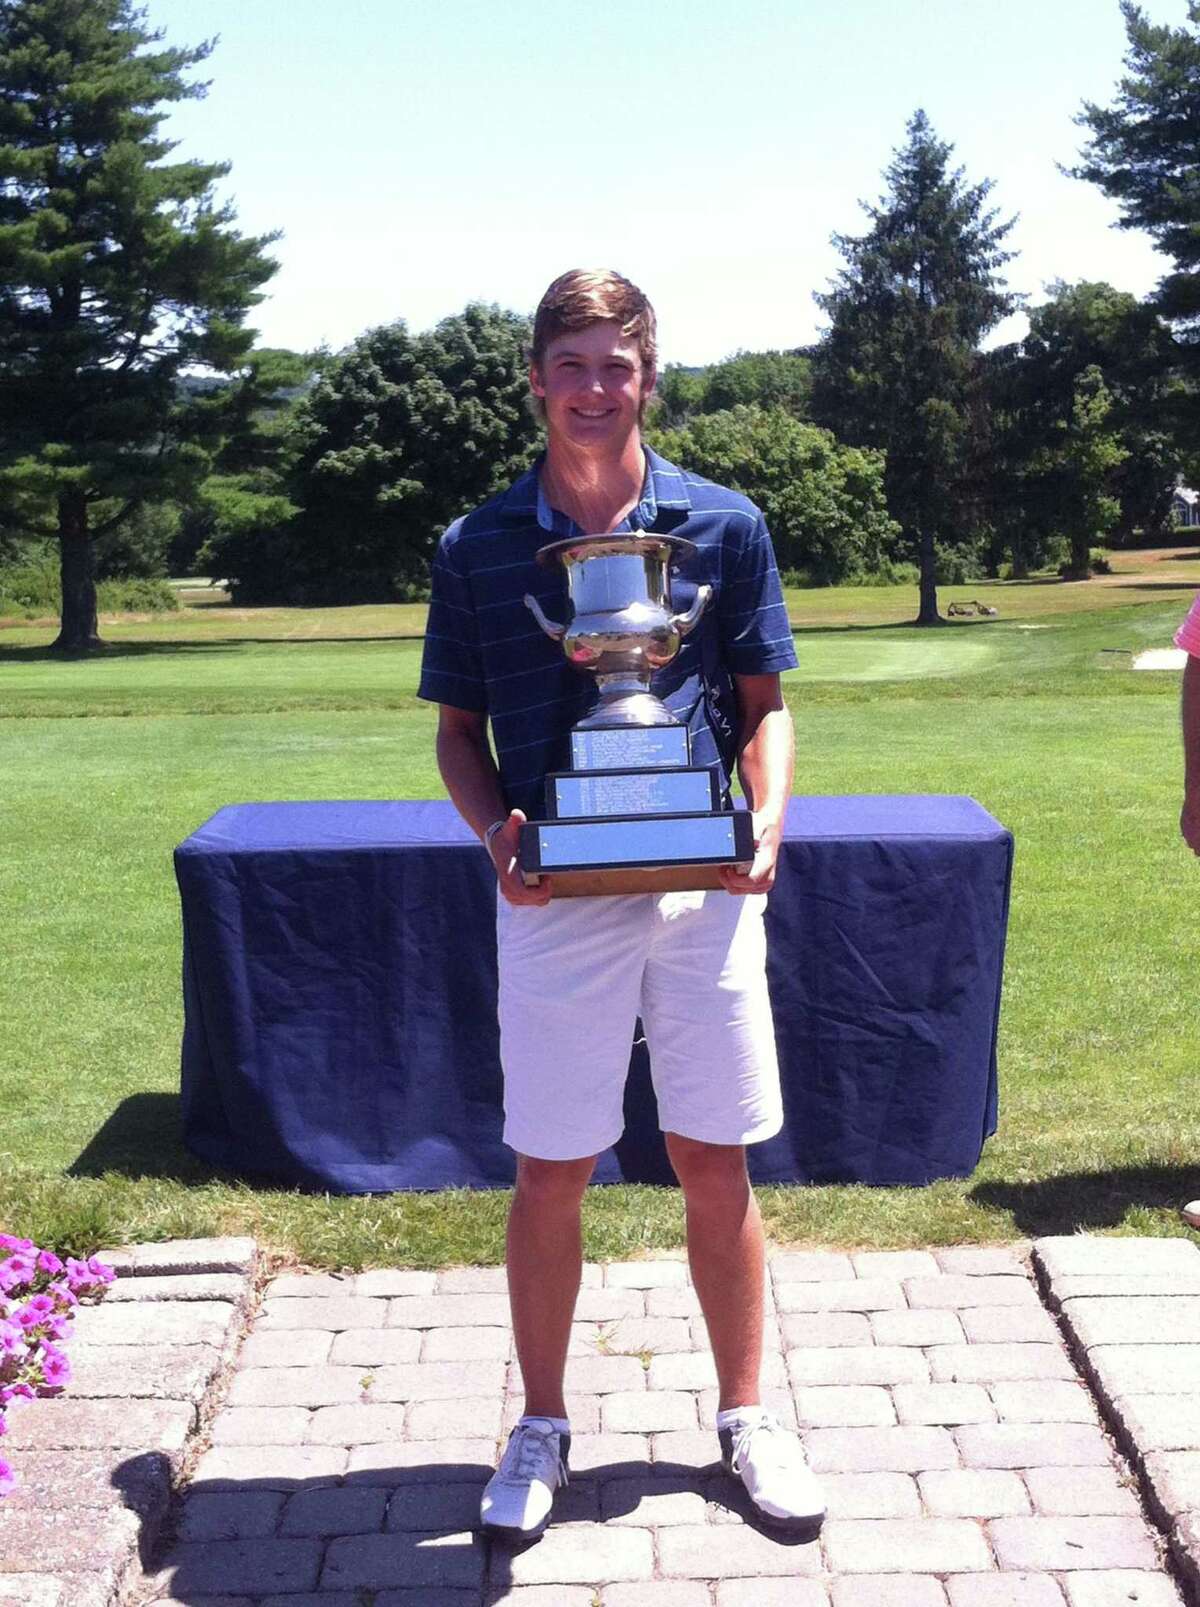 Connor Belcastro, a Brunswick School student and Rowayton resident, shown here after winning the 77th Connecticut Junior Amateur Championship on July 12, has advanced to the match play portion of the 101st Met Junior Championship.